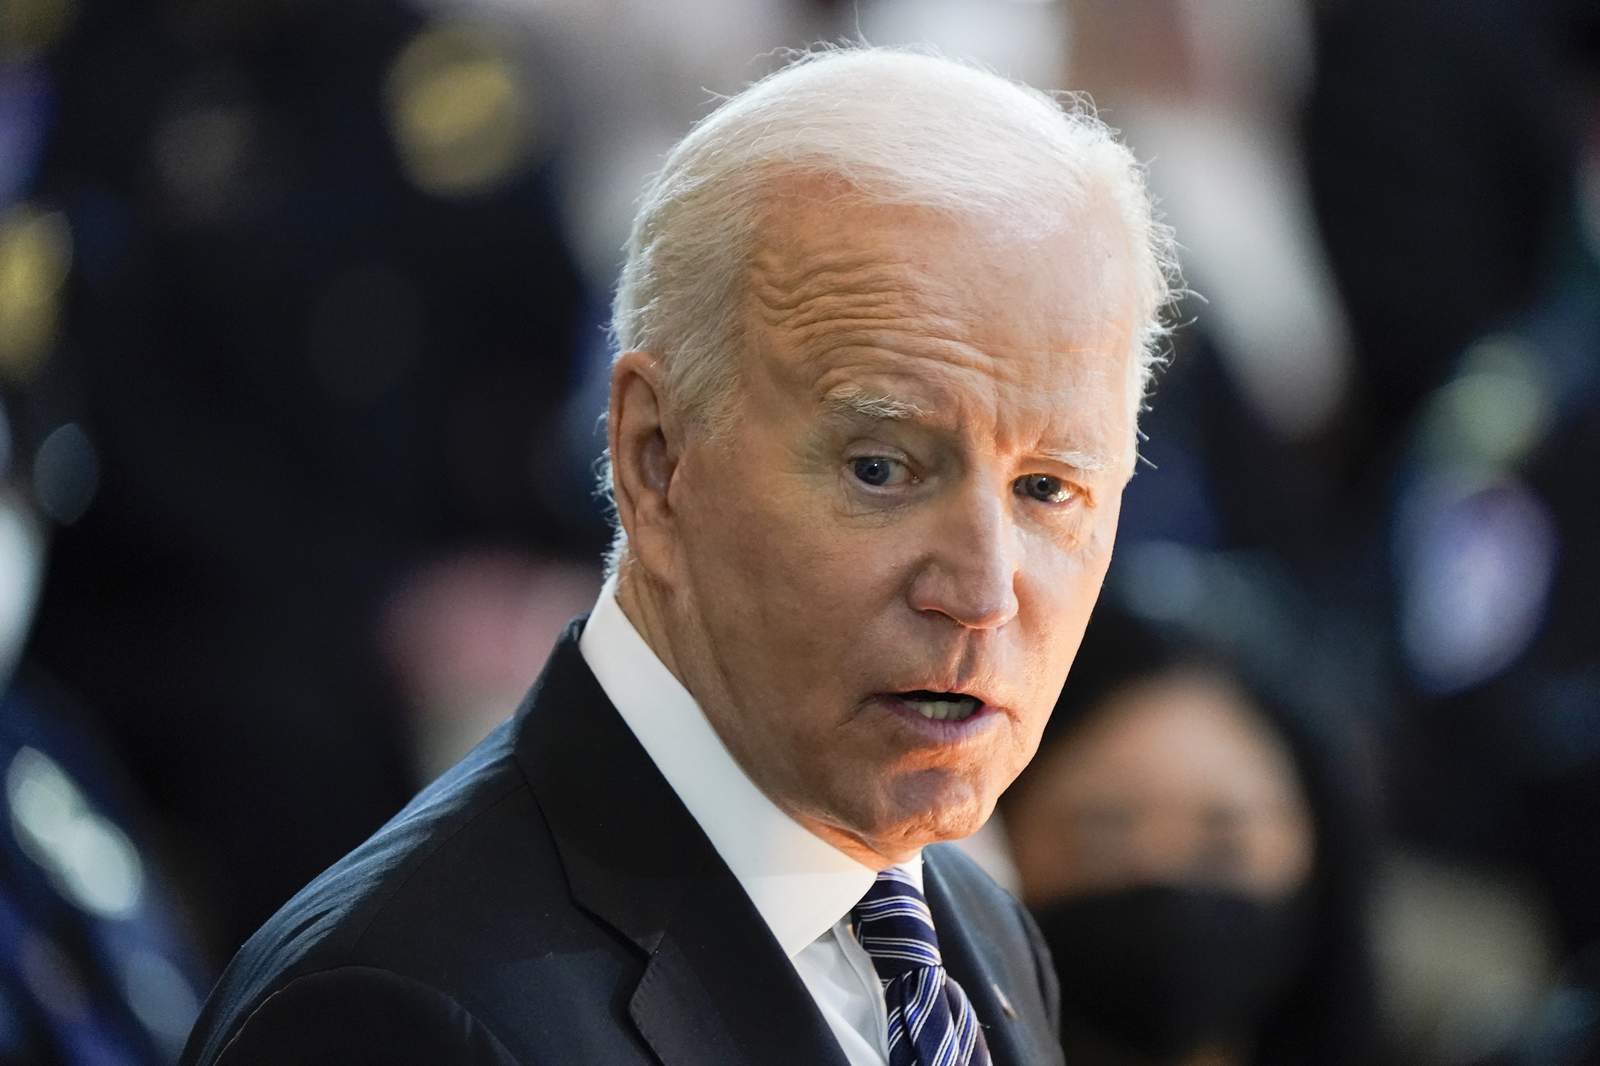 Biden details pullout plans for last troops in Afghanistan